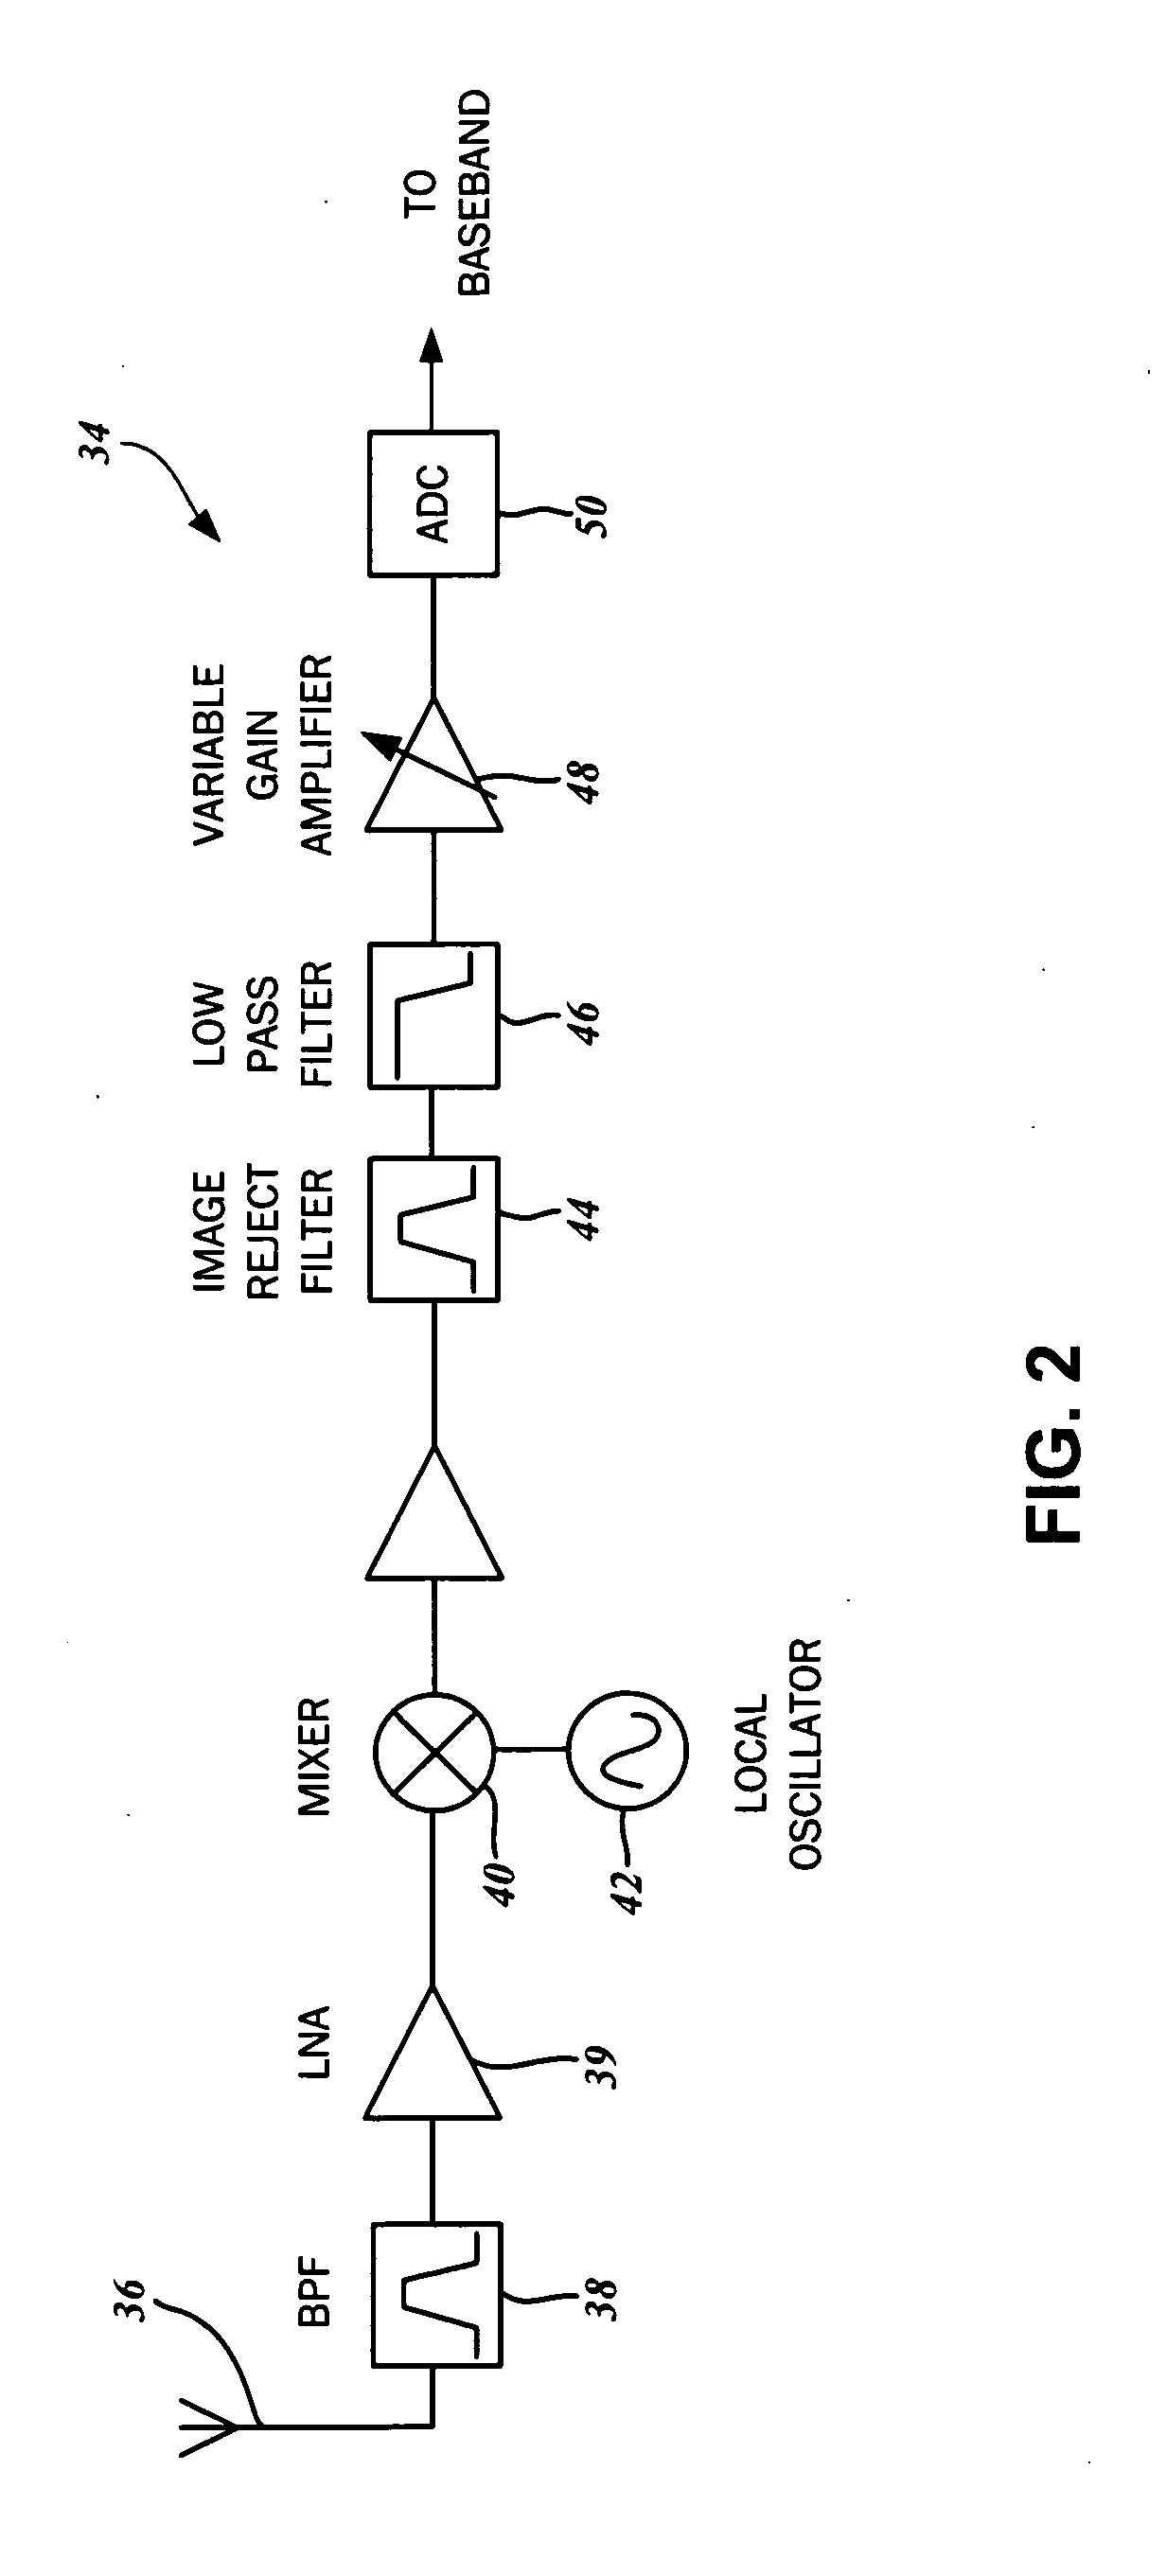 Multi-channel radio frequency front end circuit with full transmit and receive diversity for multi-path mitigation